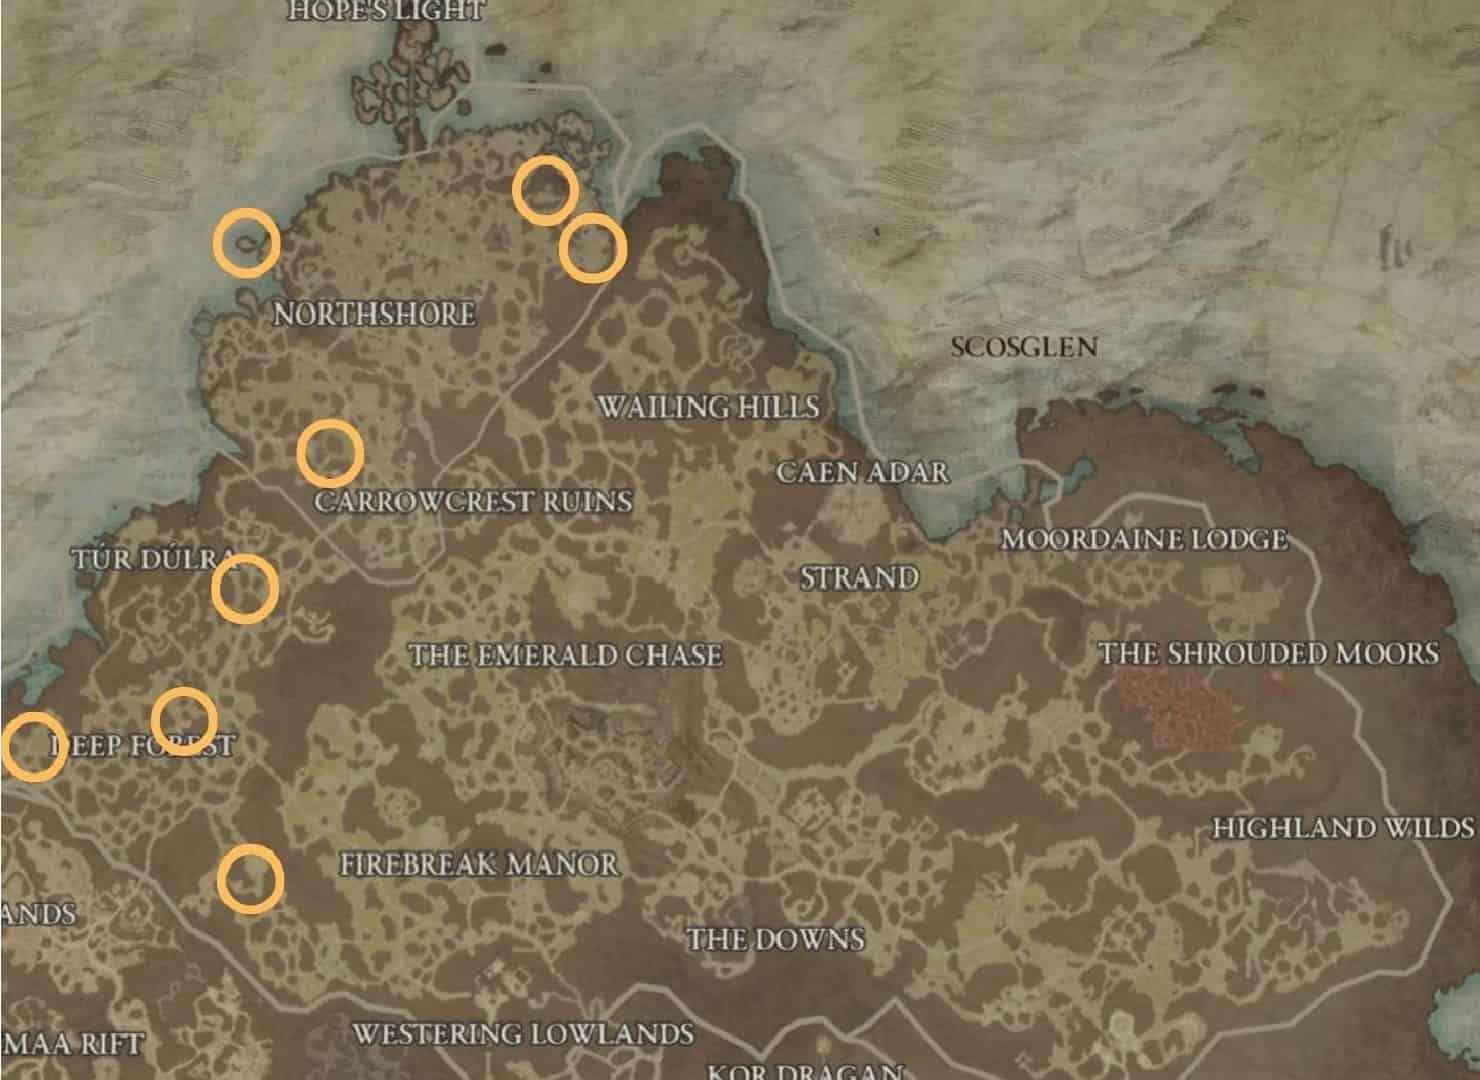 Diablo 4 mystery chest locations: An image of an in-game map with the potential Tortured Gift of Mystery chest spawn locations in Scosglen.